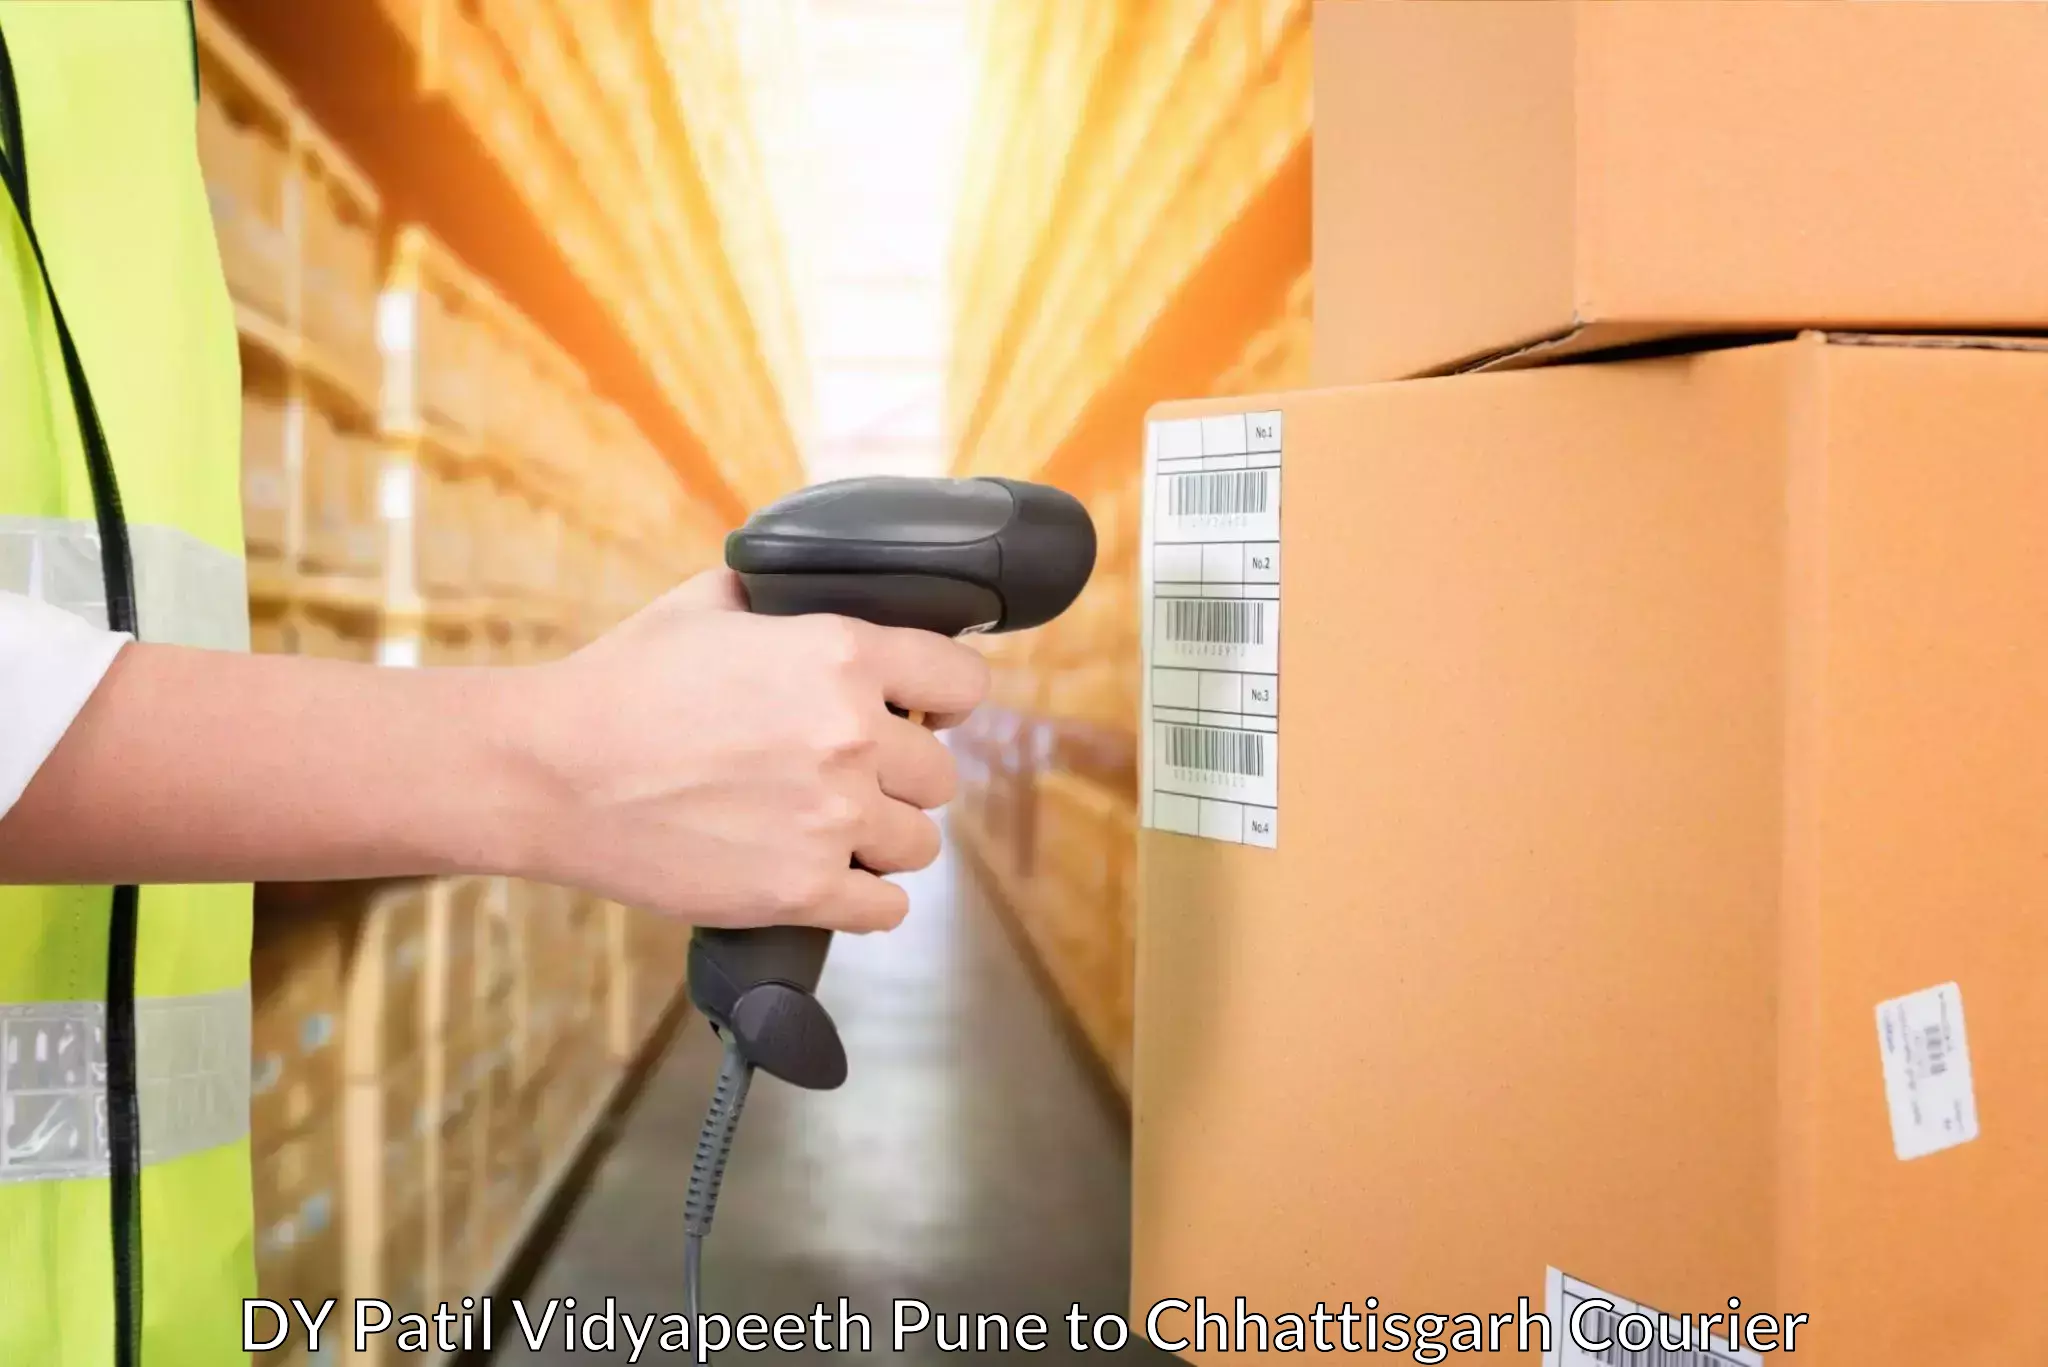 Customizable shipping options in DY Patil Vidyapeeth Pune to Bhanupratappur